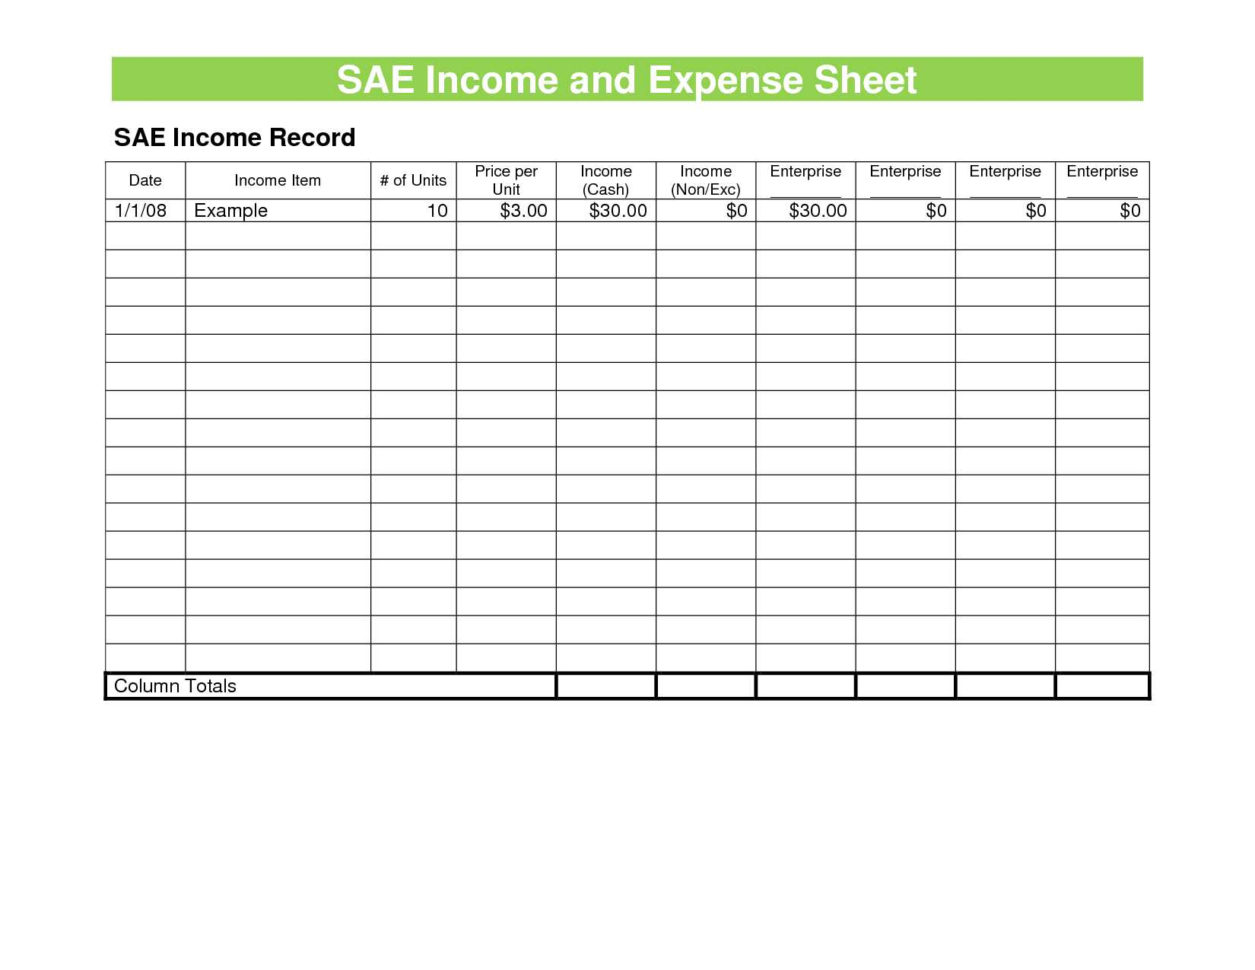 daily personal expense excel sheet free download